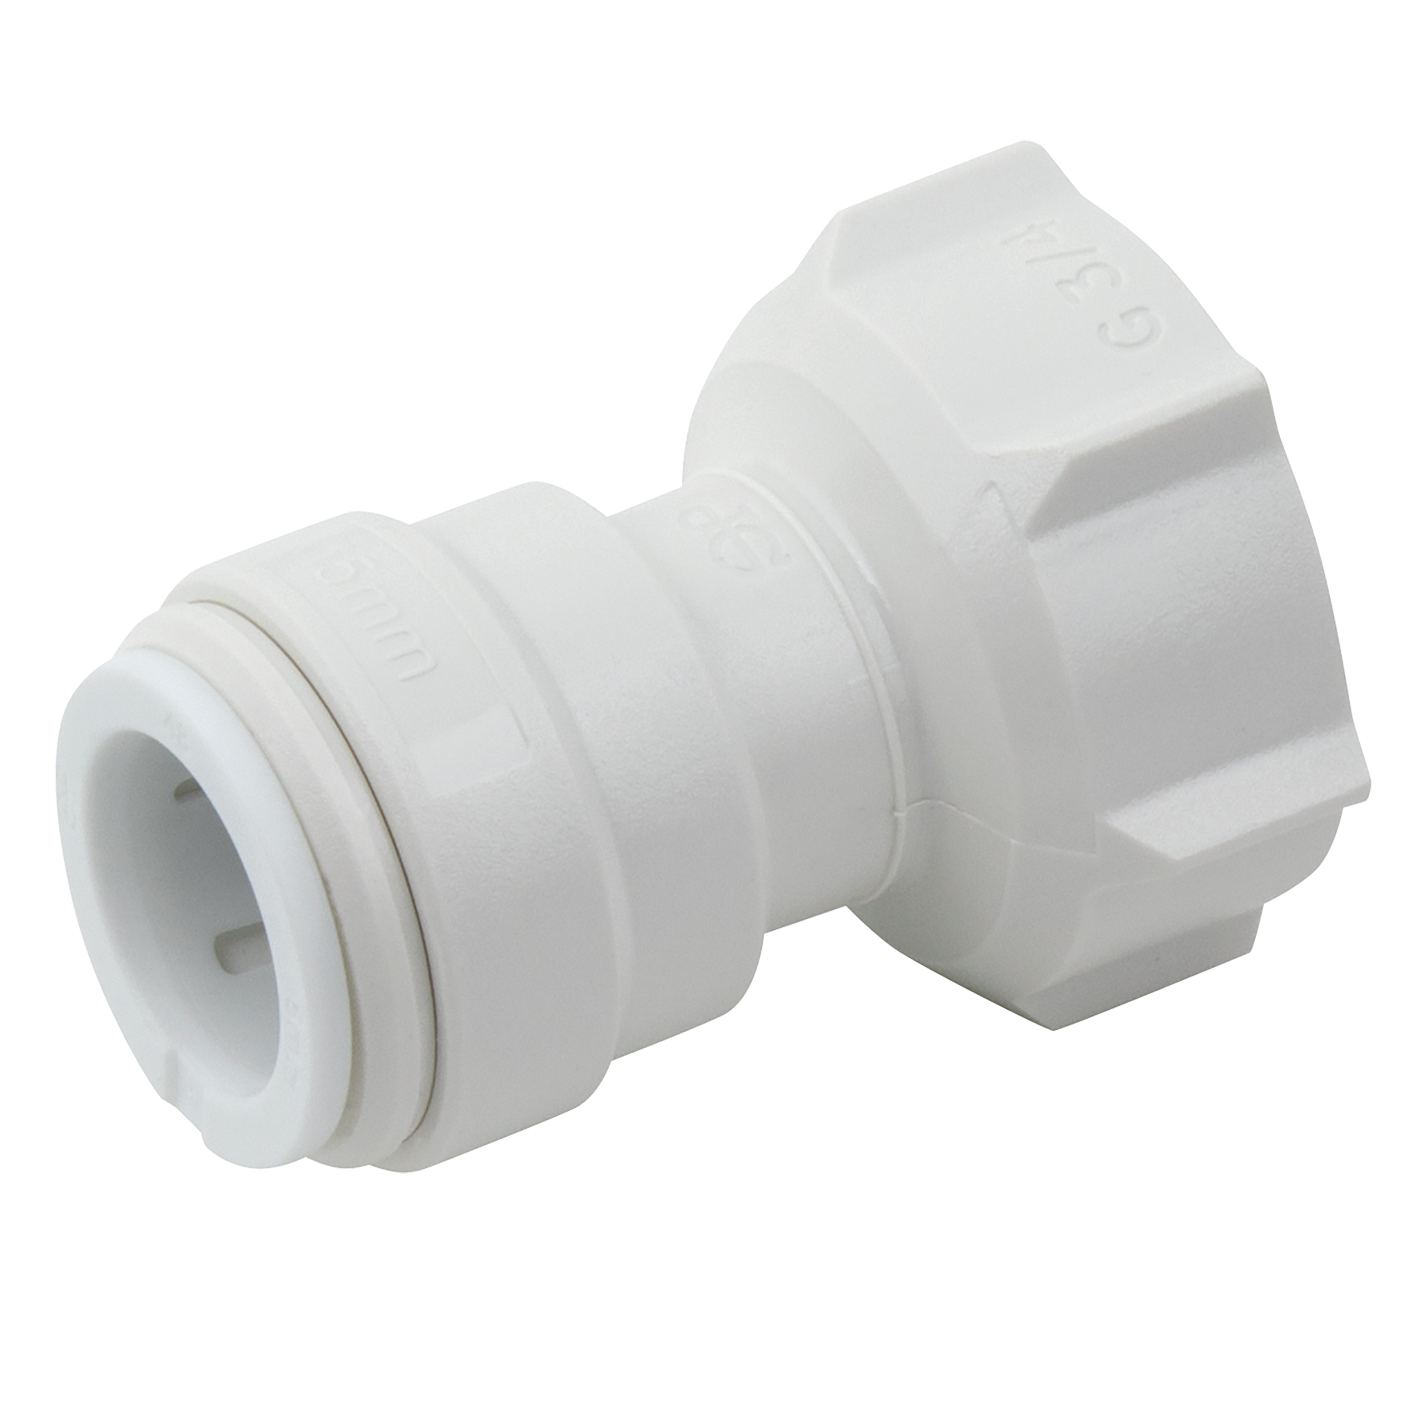 10 X 1/2" FEMALE COUPLER/TAP CONNECTOR